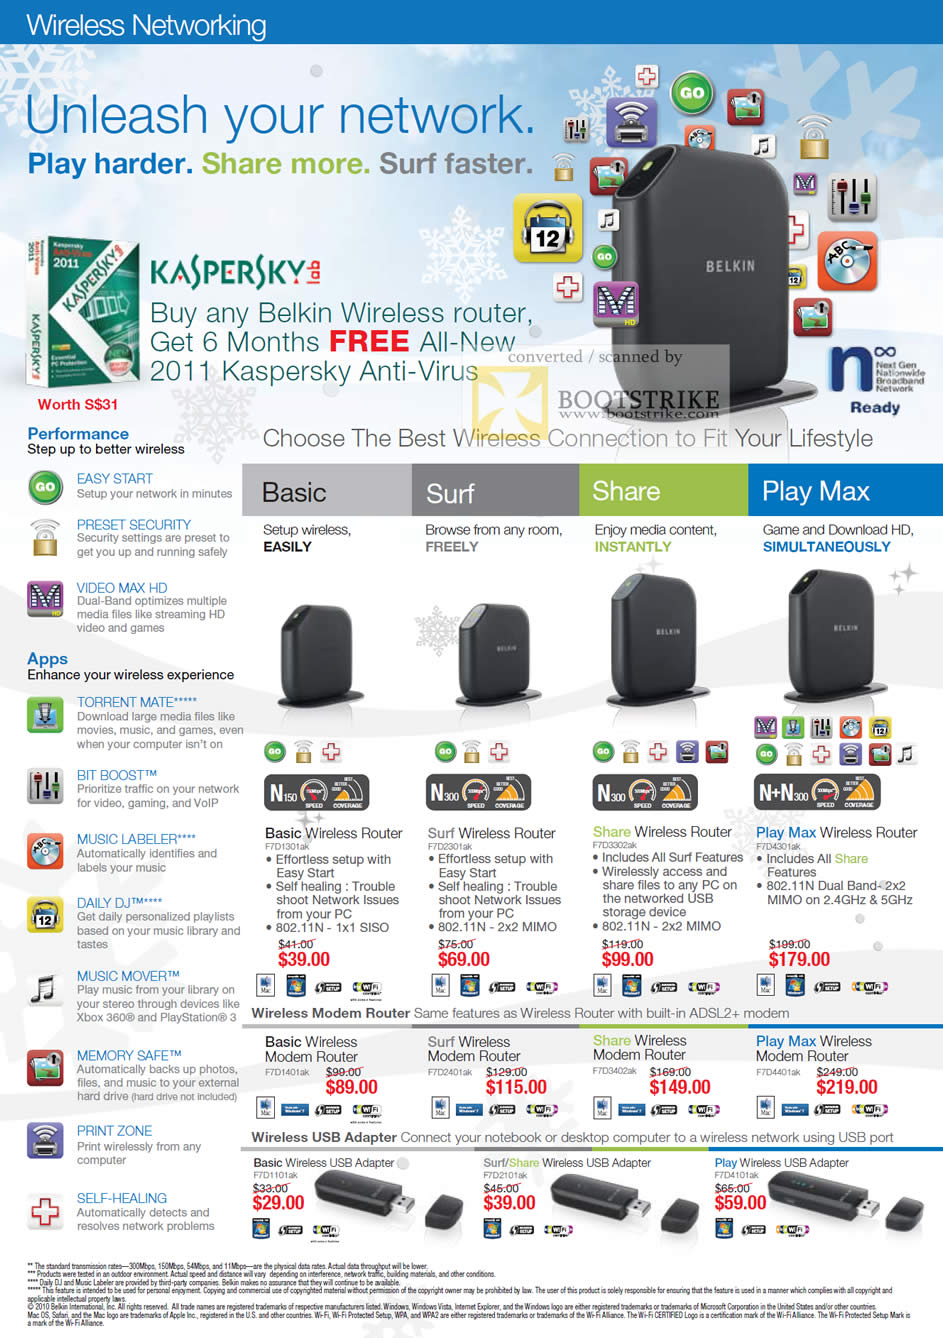 Sitex 2010 price list image brochure of Belkin Wireless Networking Router Surf Share Play Max N Adapter